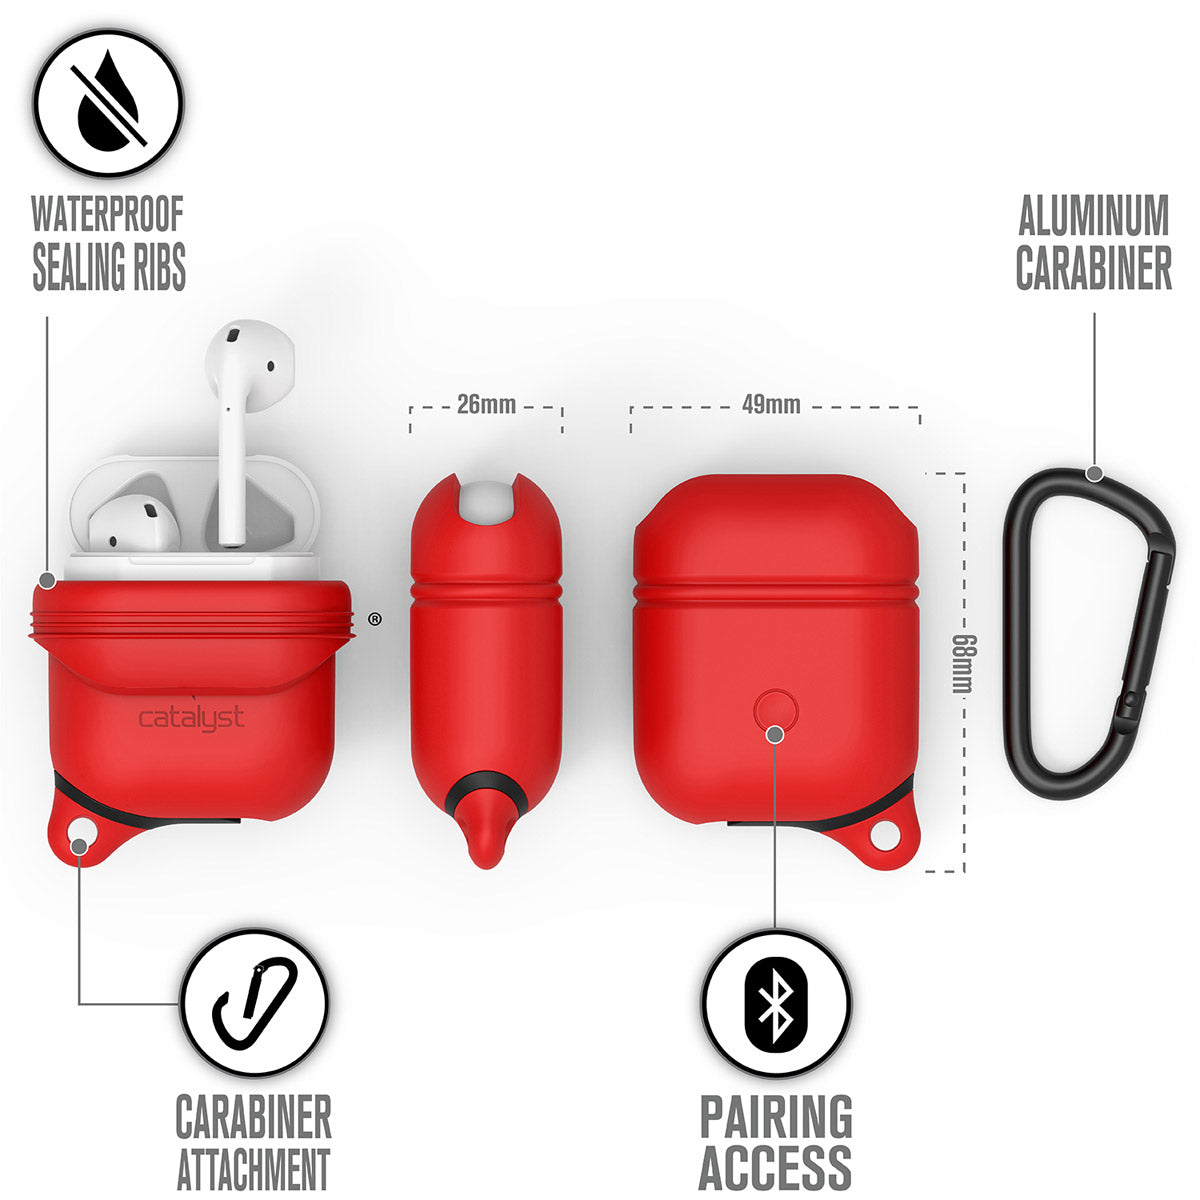 CATAPDRED | Catalyst airpods gen2/1 waterproof case + carabiner showing the case dimension and features in flame red text reads waterproof sealing ribs aluminum carabiner pairing access carabiner attachment